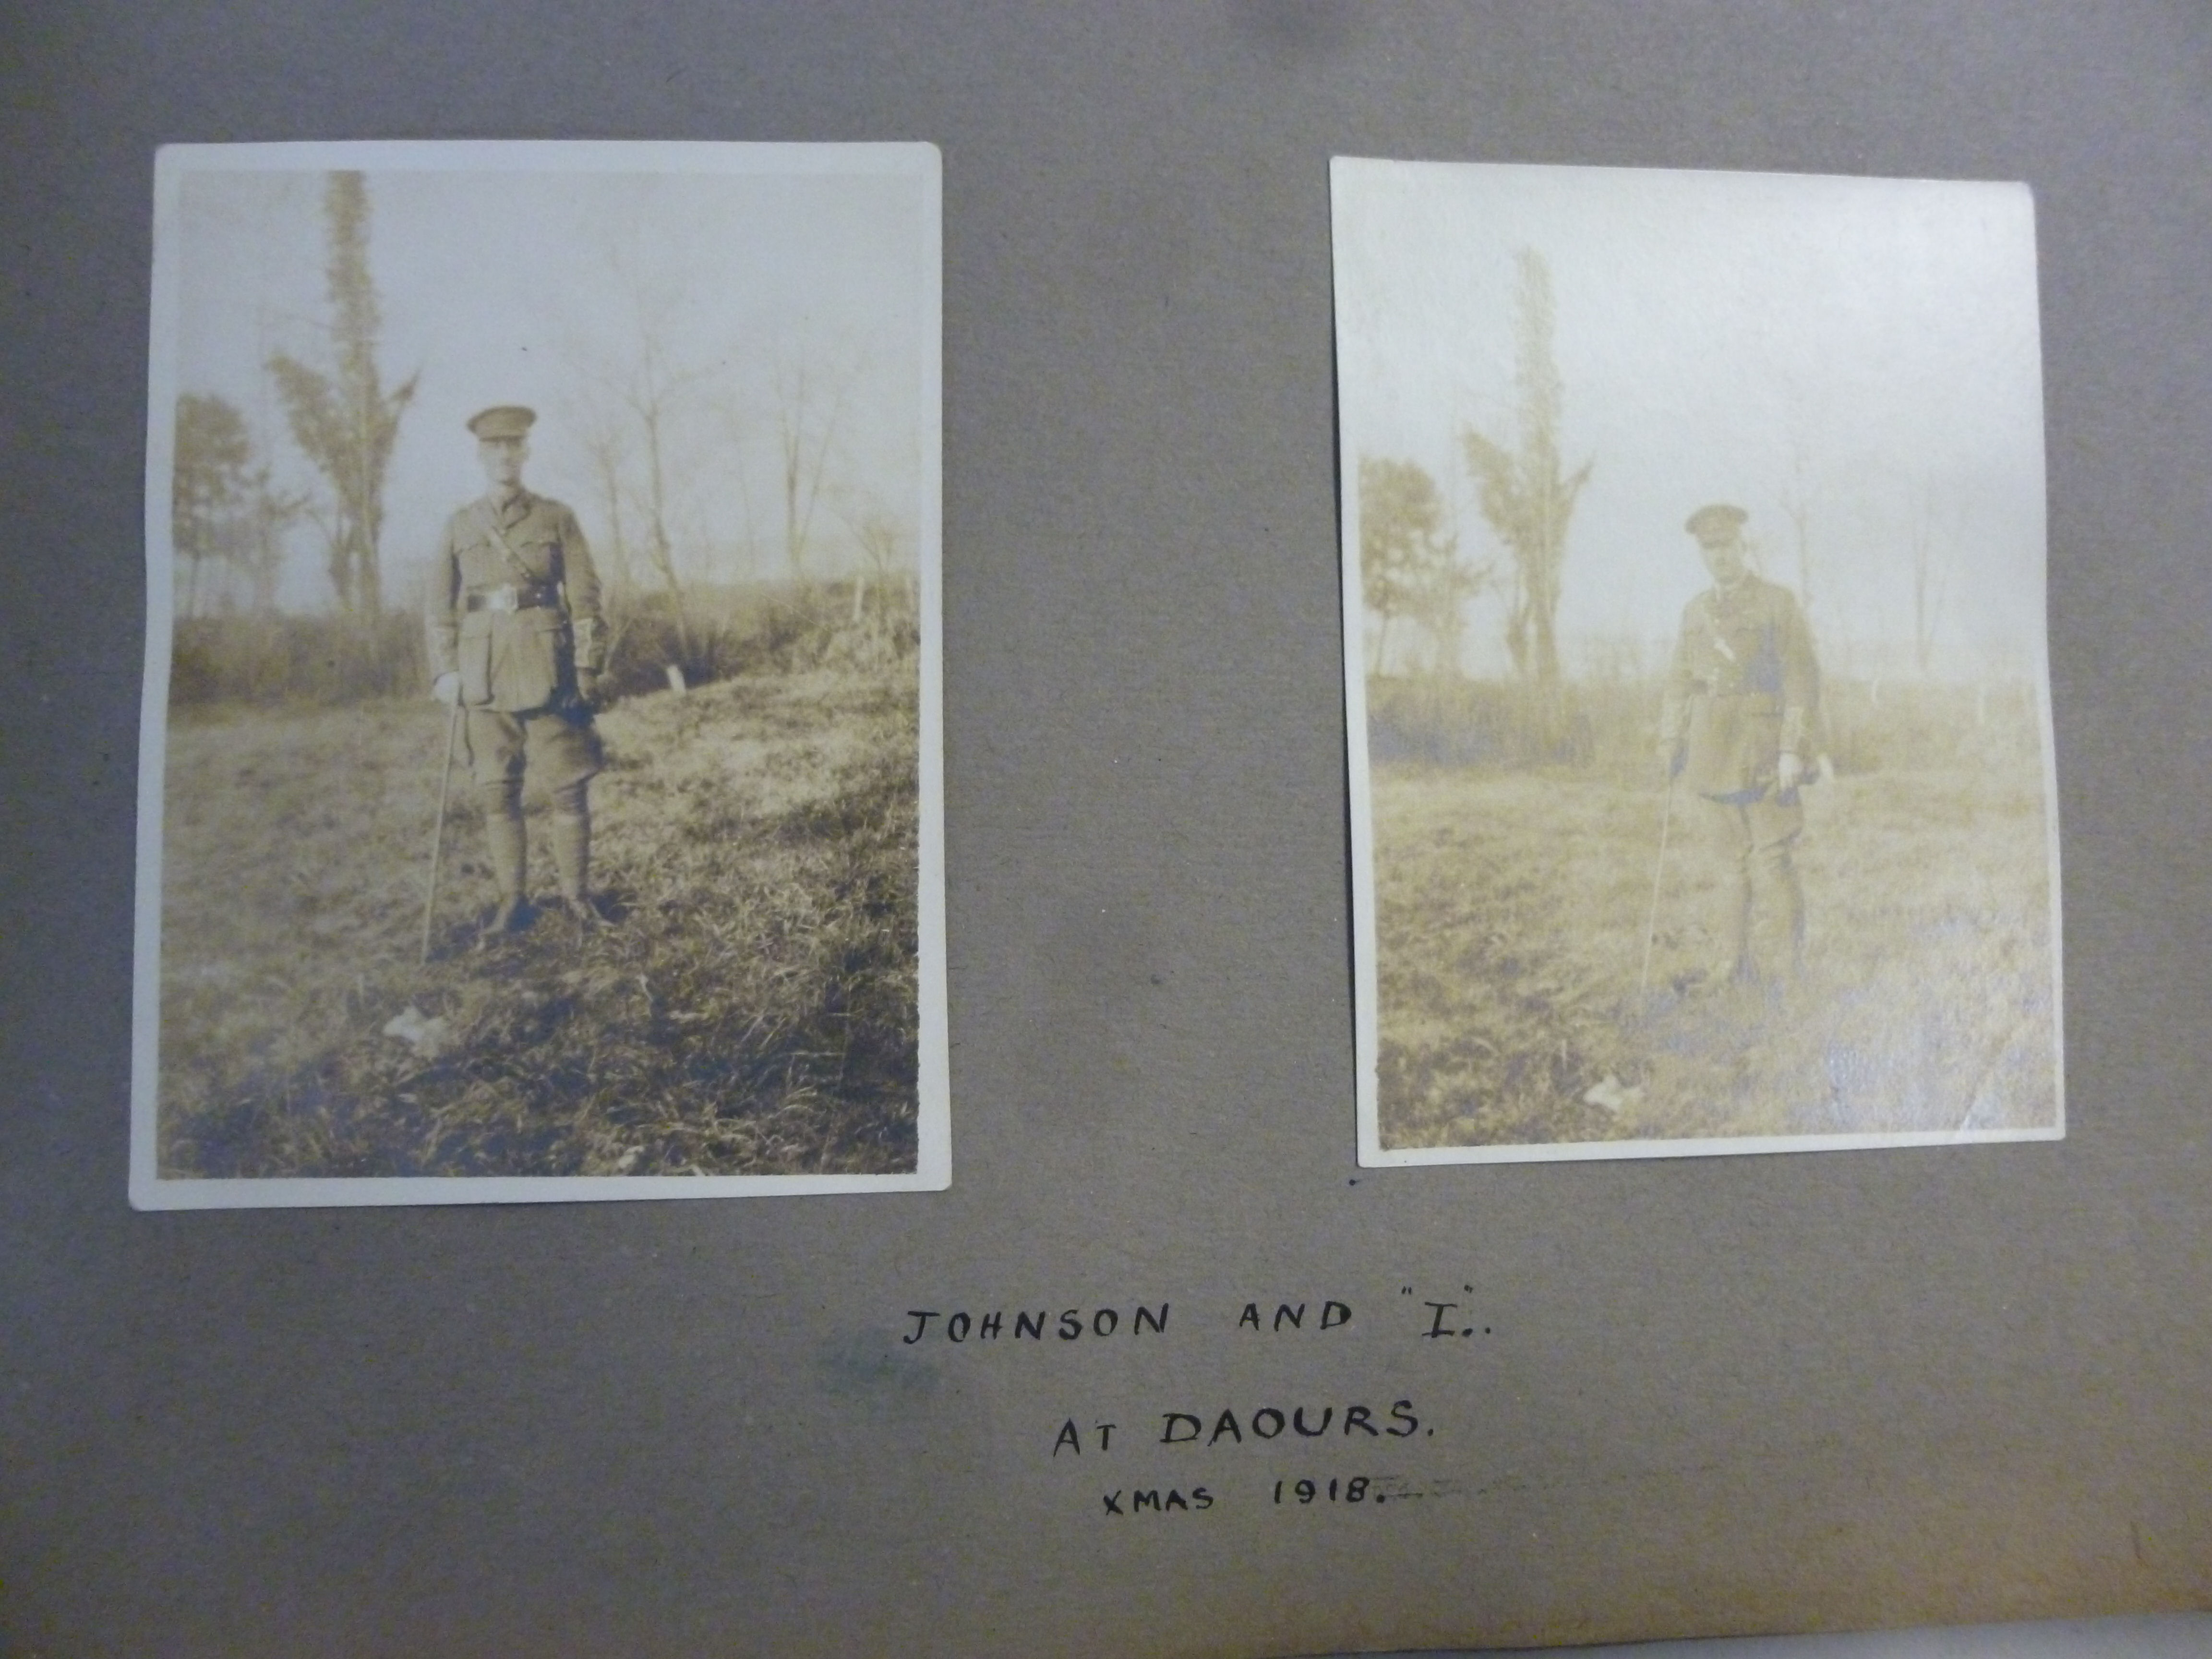 Two uncollated snapshot photograph album